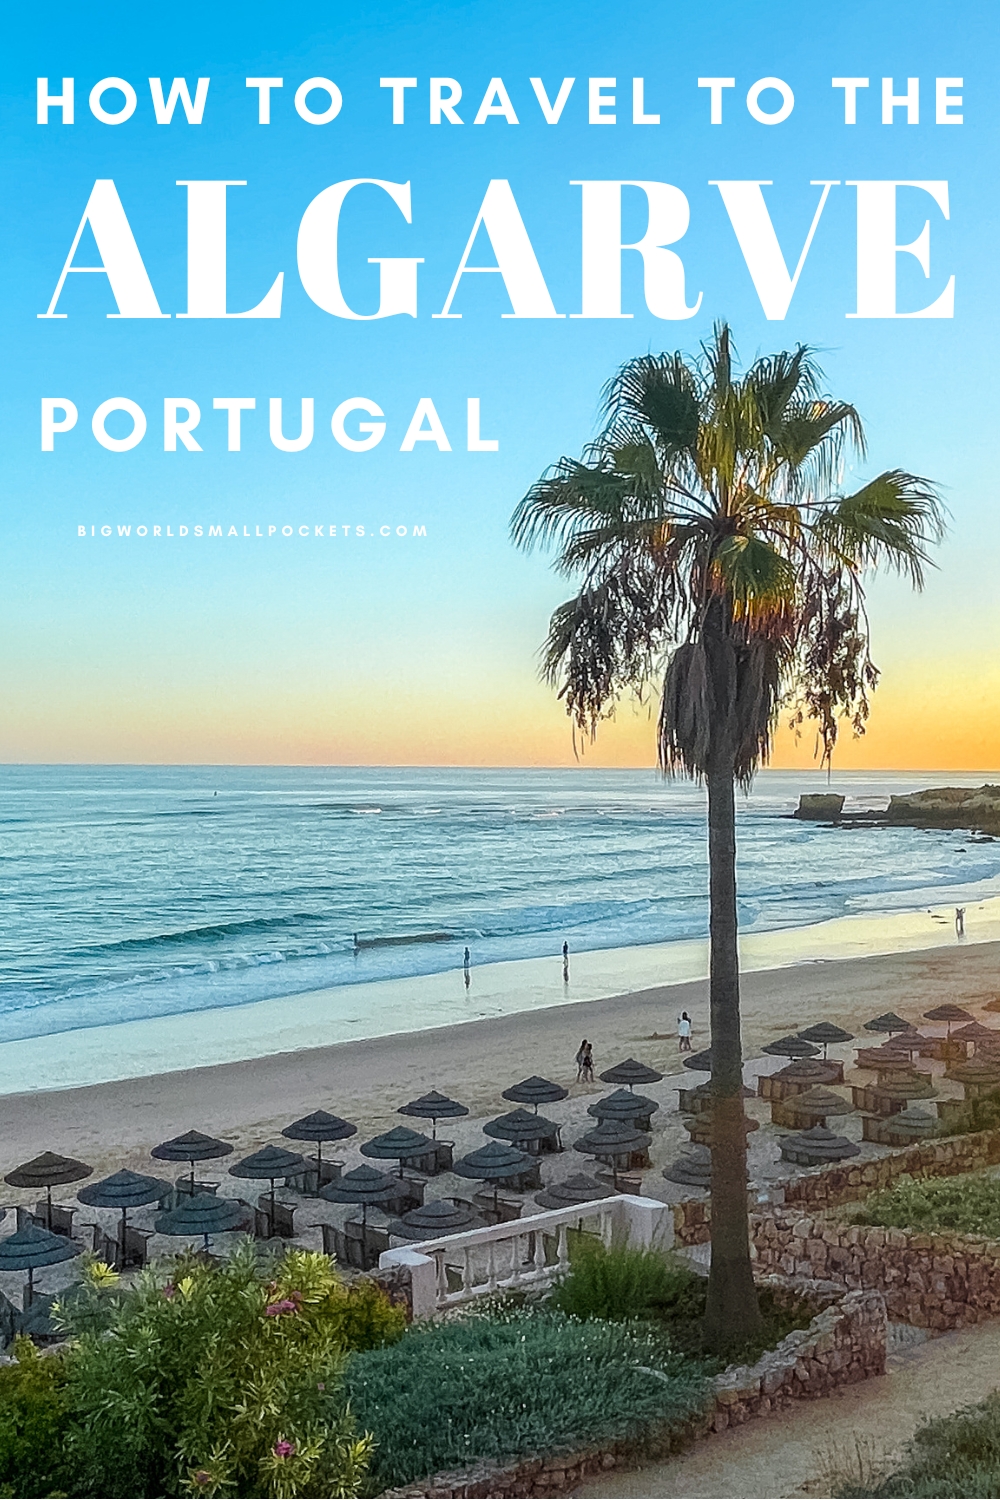 How to Travel to the Algarve, Portugal